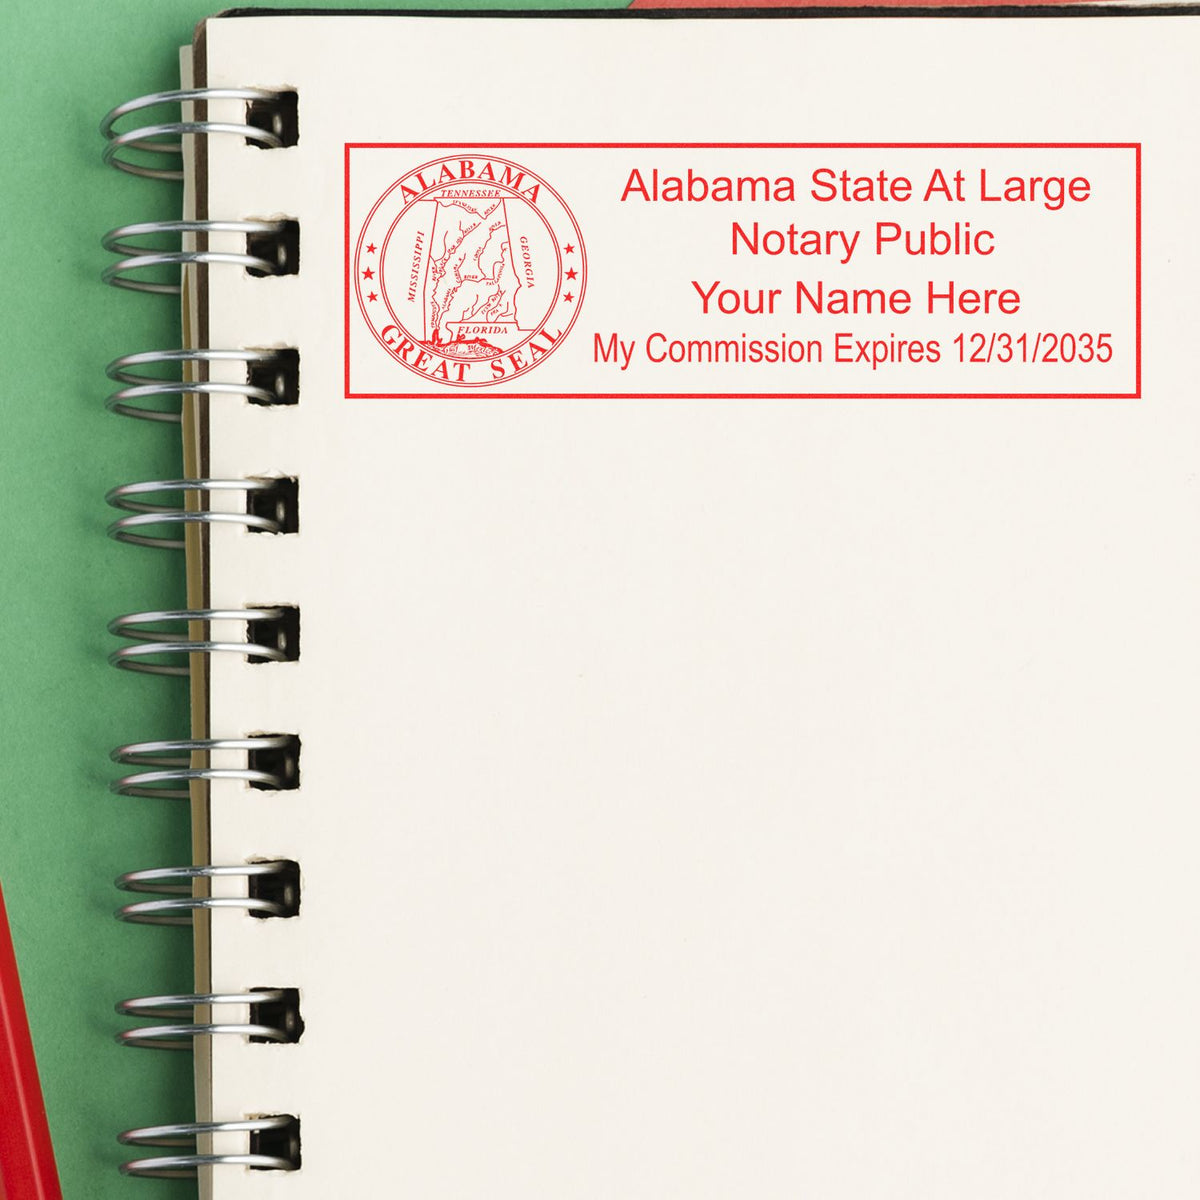 An alternative view of the MaxLight Premium Pre-Inked Alabama State Seal Notarial Stamp stamped on a sheet of paper showing the image in use